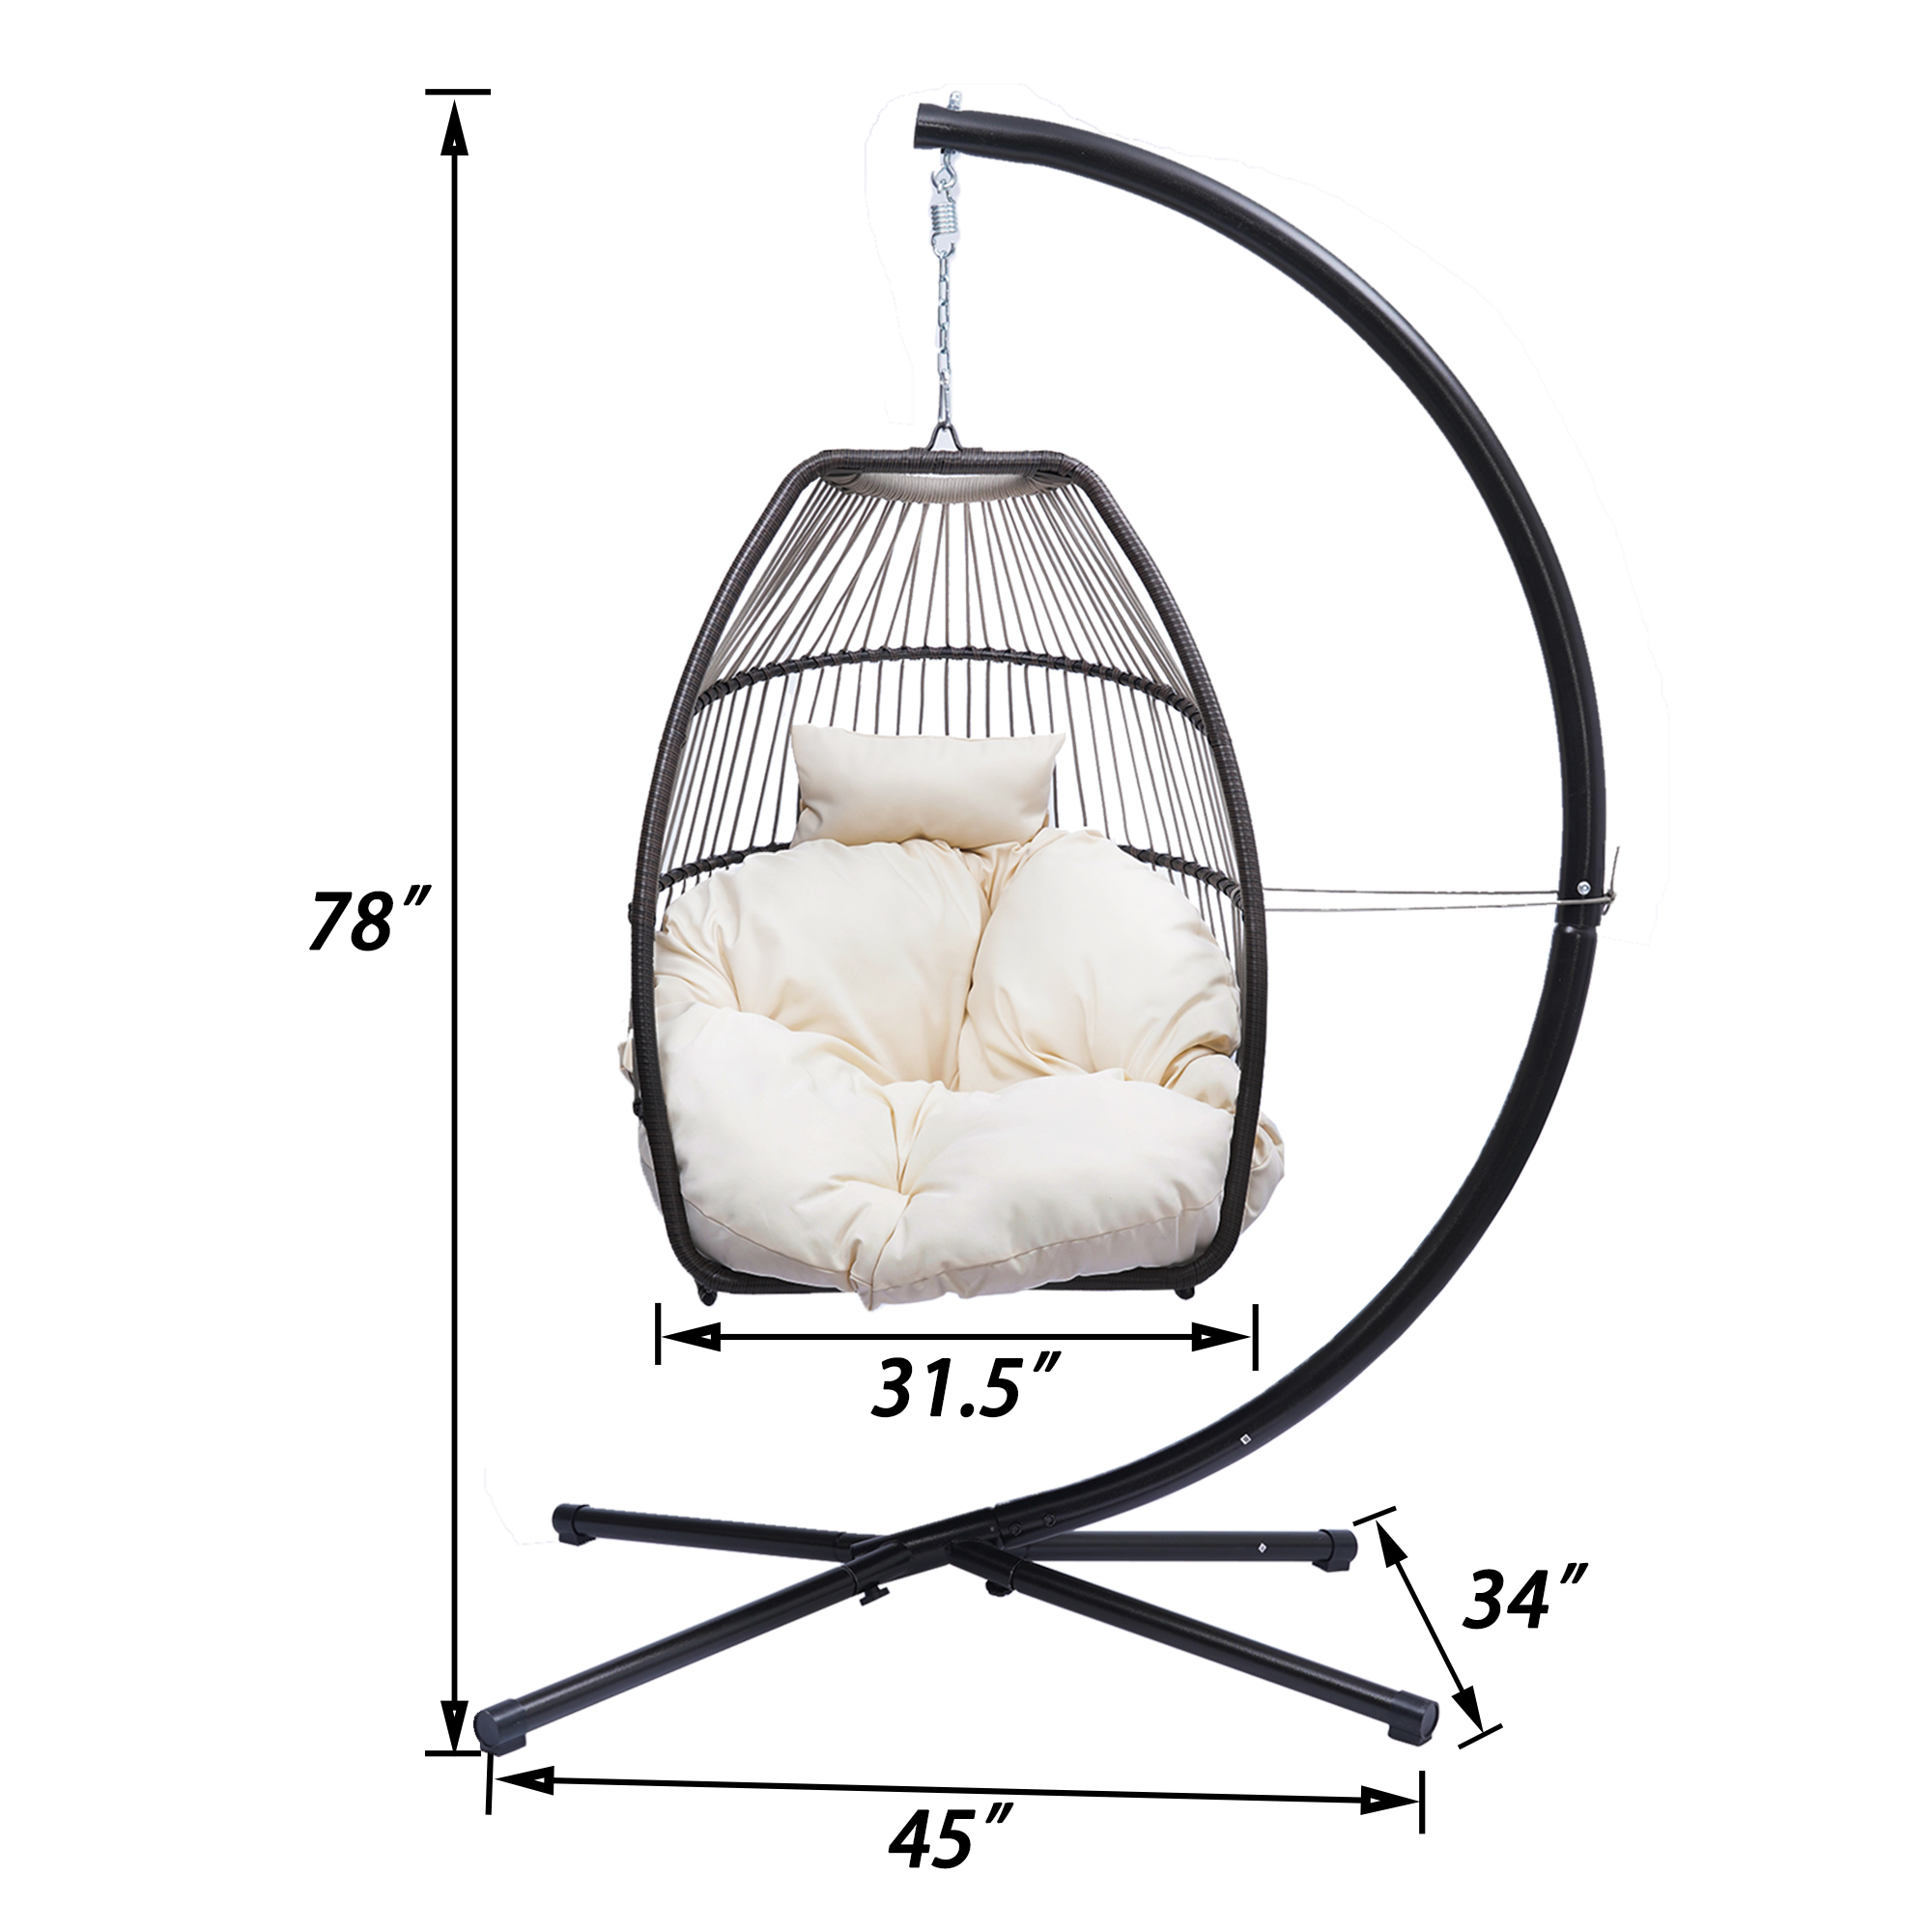 Outdoor Yard Folding Hanging Chair Egg Chair with Stand Indoor Outdoor Balcony Bedroom Basket Hanging Lounge Chair - image 4 of 9